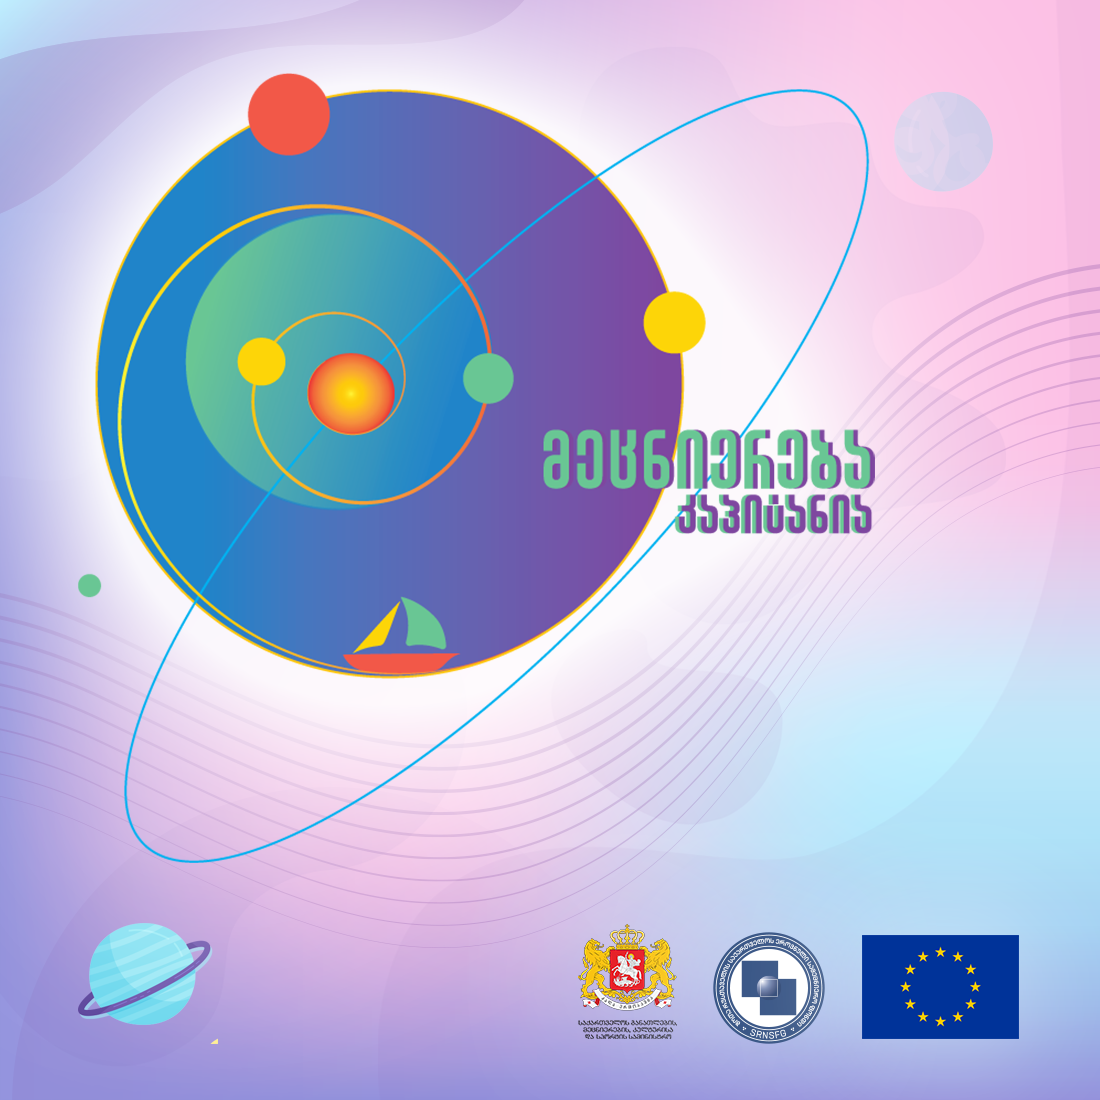 Shota Rustaveli National Science Foundation of Georgia Held Virtual Science Fair Within the Framework of the Project “Science is Captain”